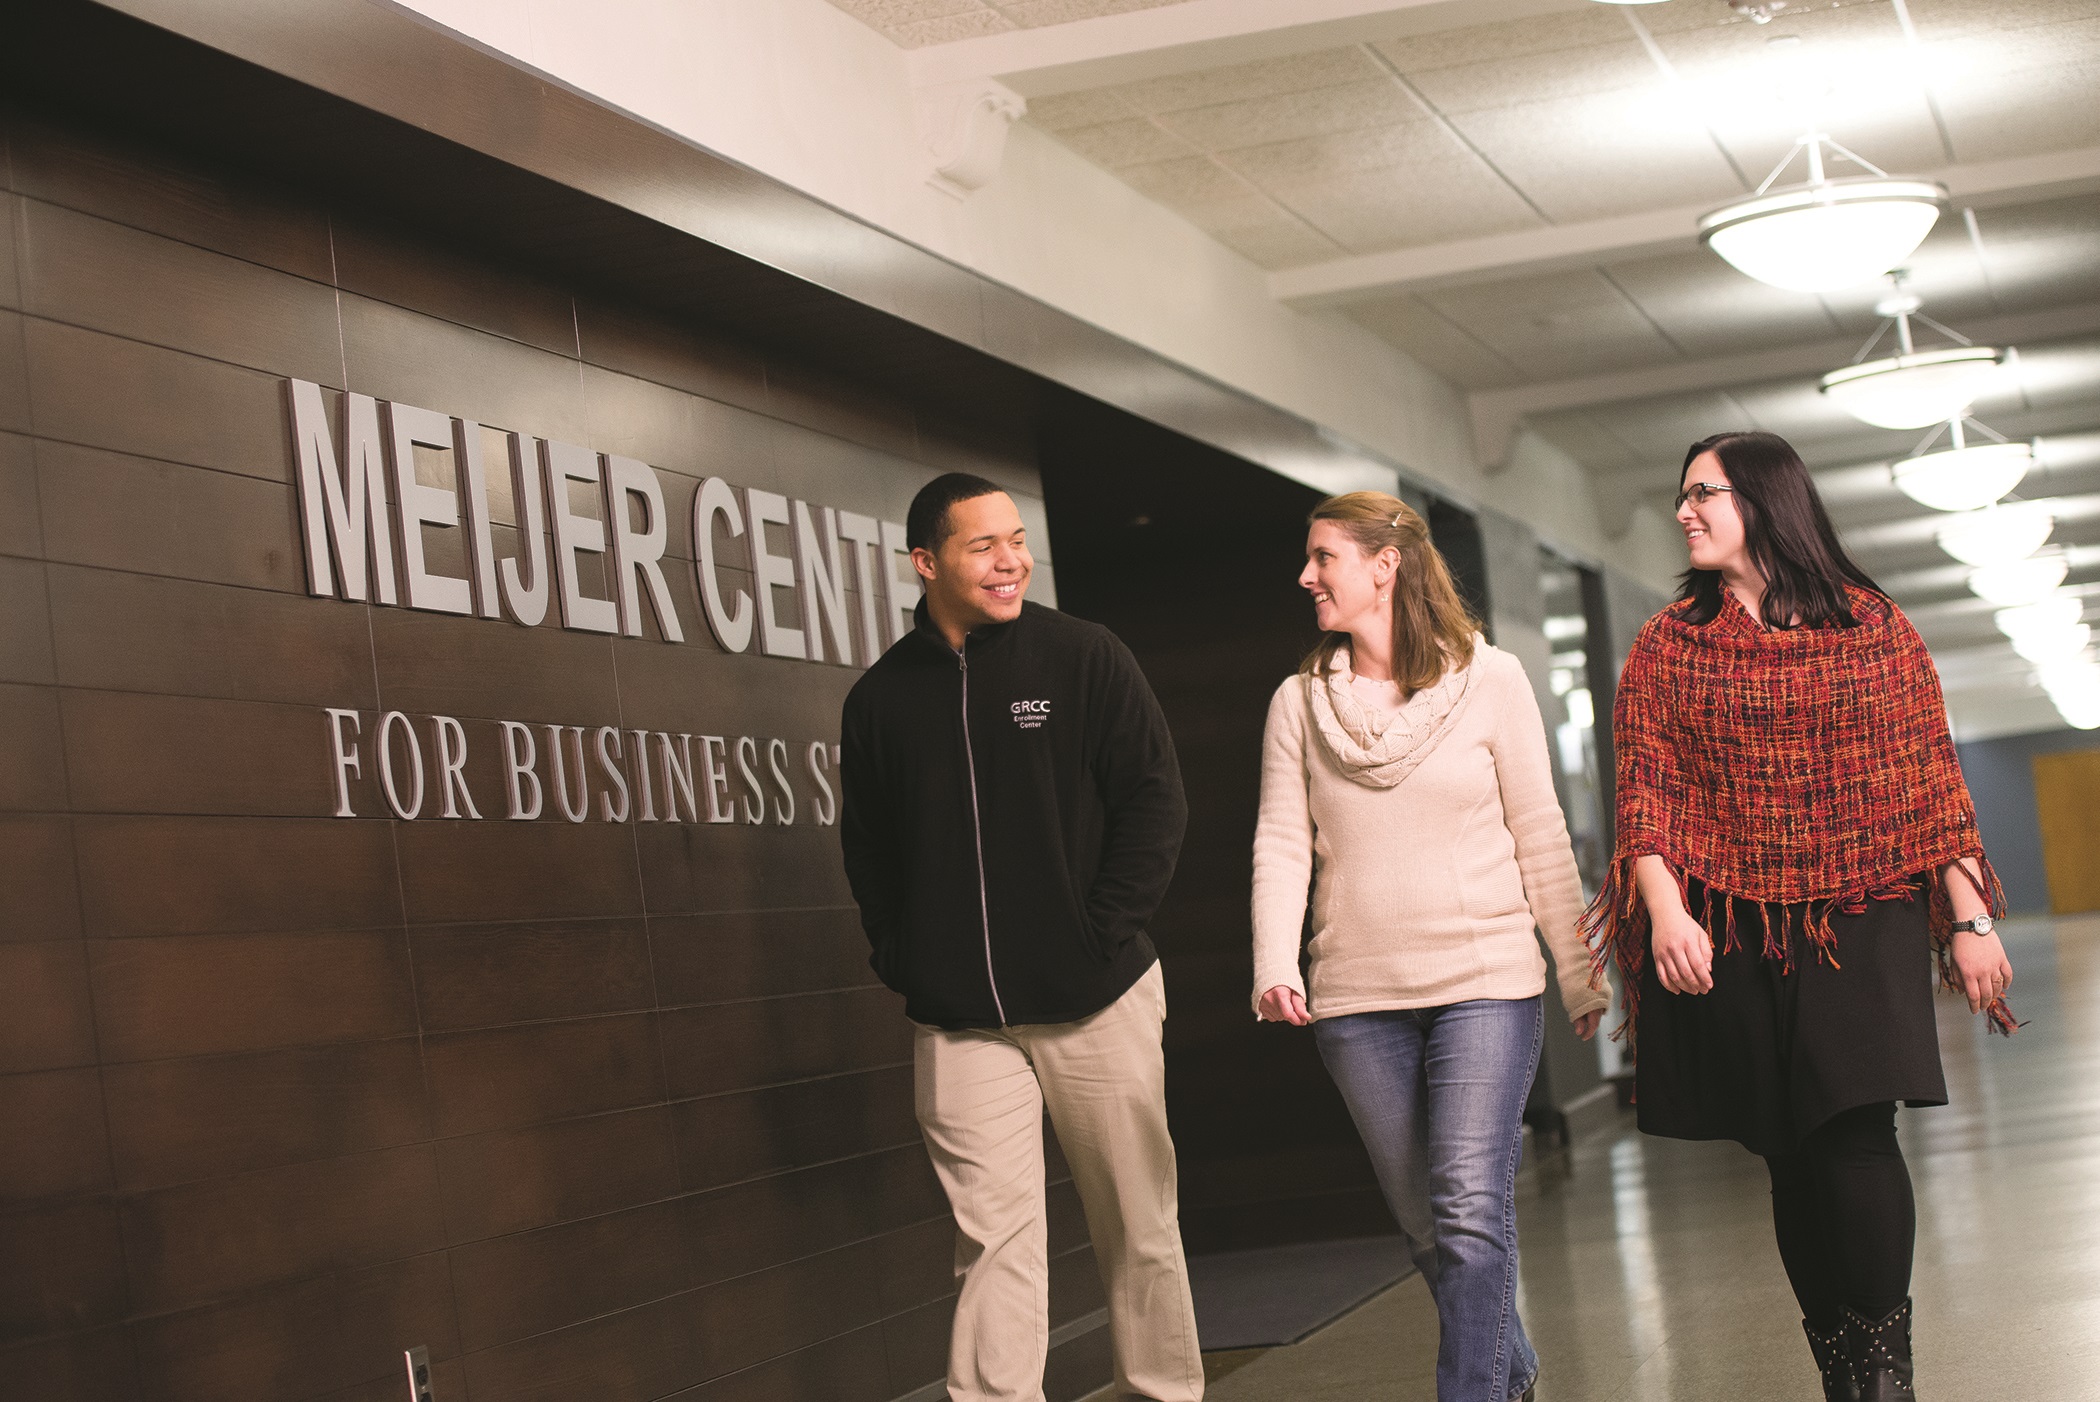 GRCC Business Students Walking in the Hallway of the Meijer Center for Business